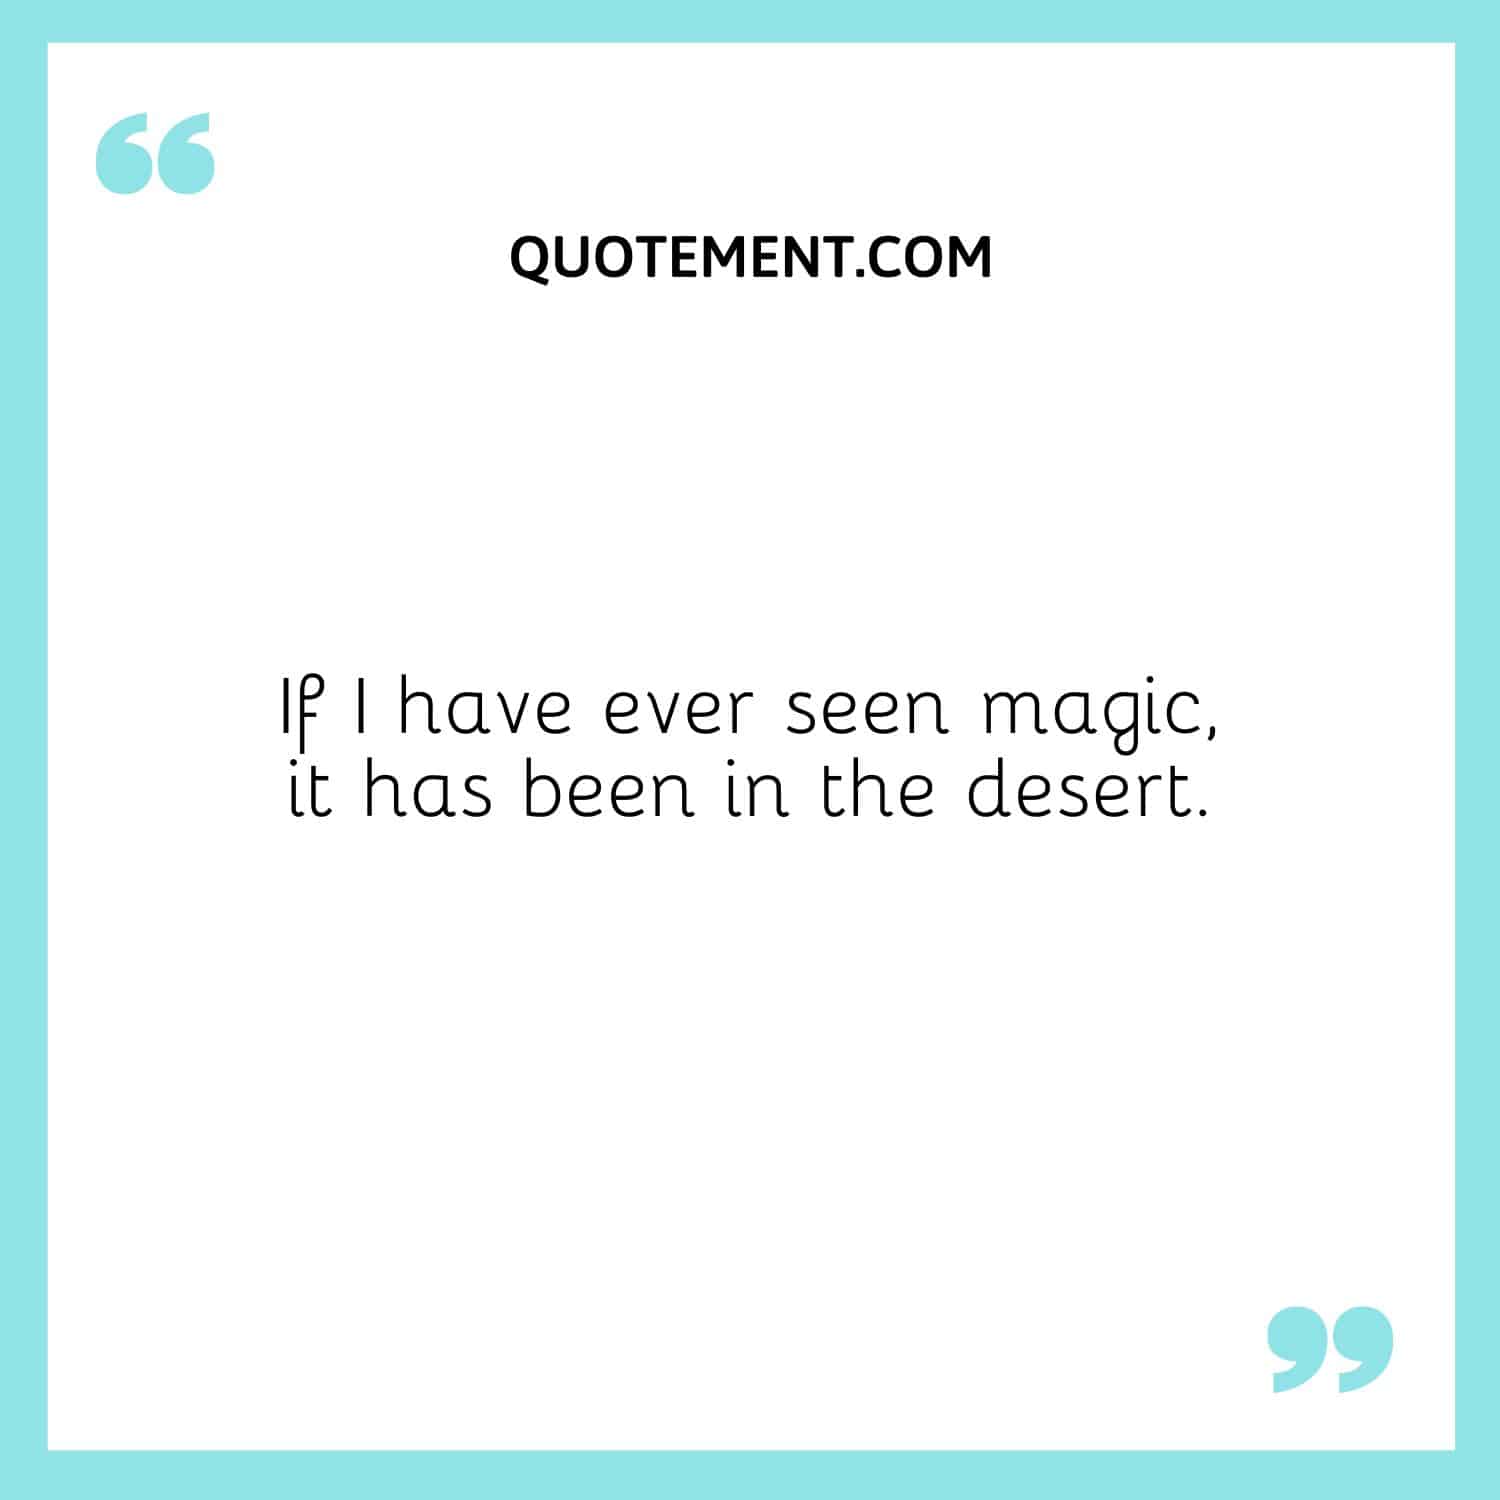 If I have ever seen magic, it has been in the desert.